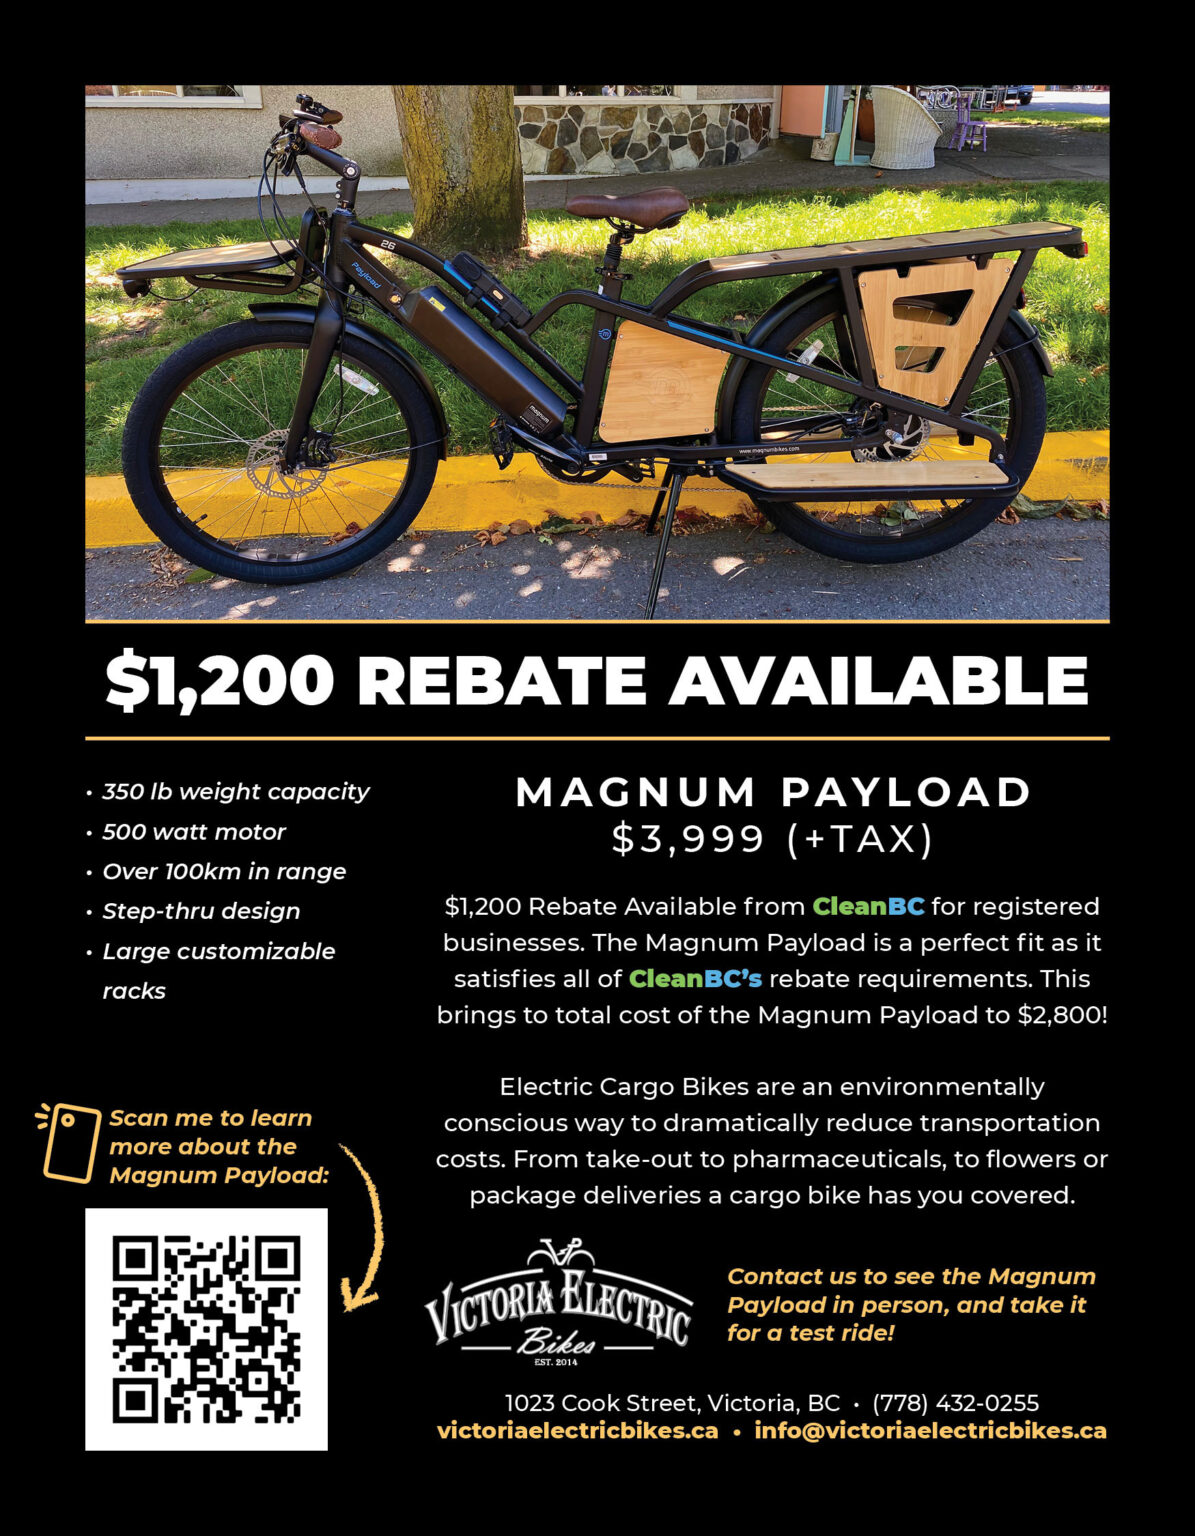 victoria-electric-bikes-1-200-business-rebate-for-magnum-payload